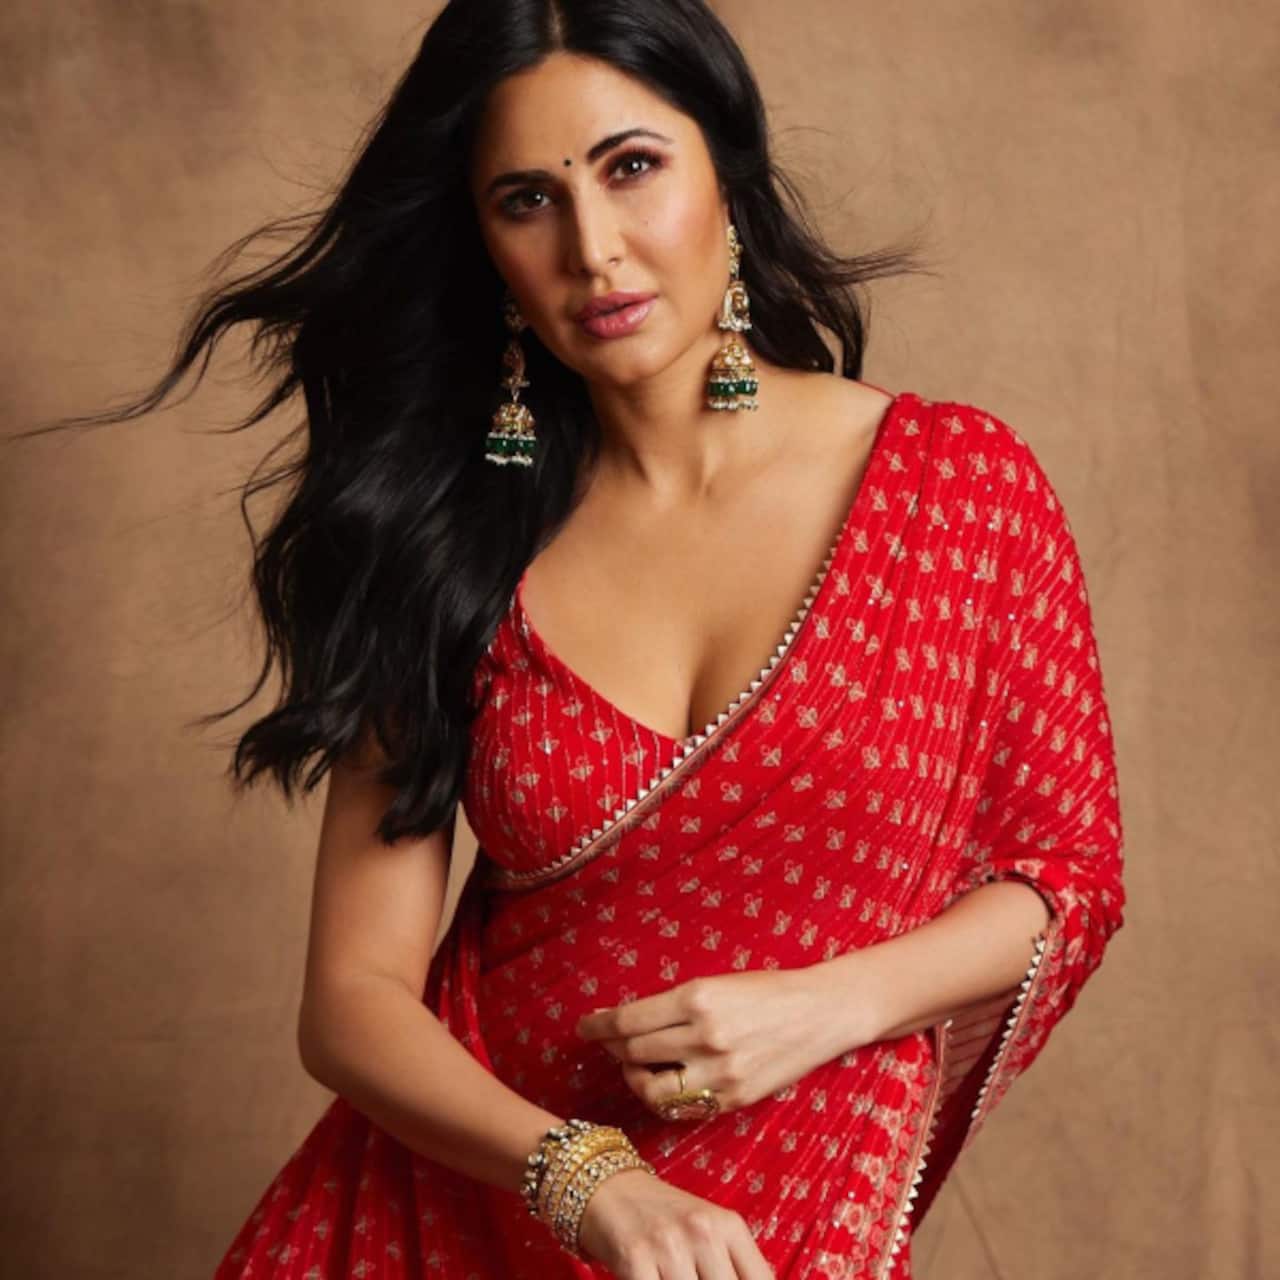 Katrina Kaif was thrown out of THIS John Abraham film after shooting a single scene; actress reveals she felt her career was OVER